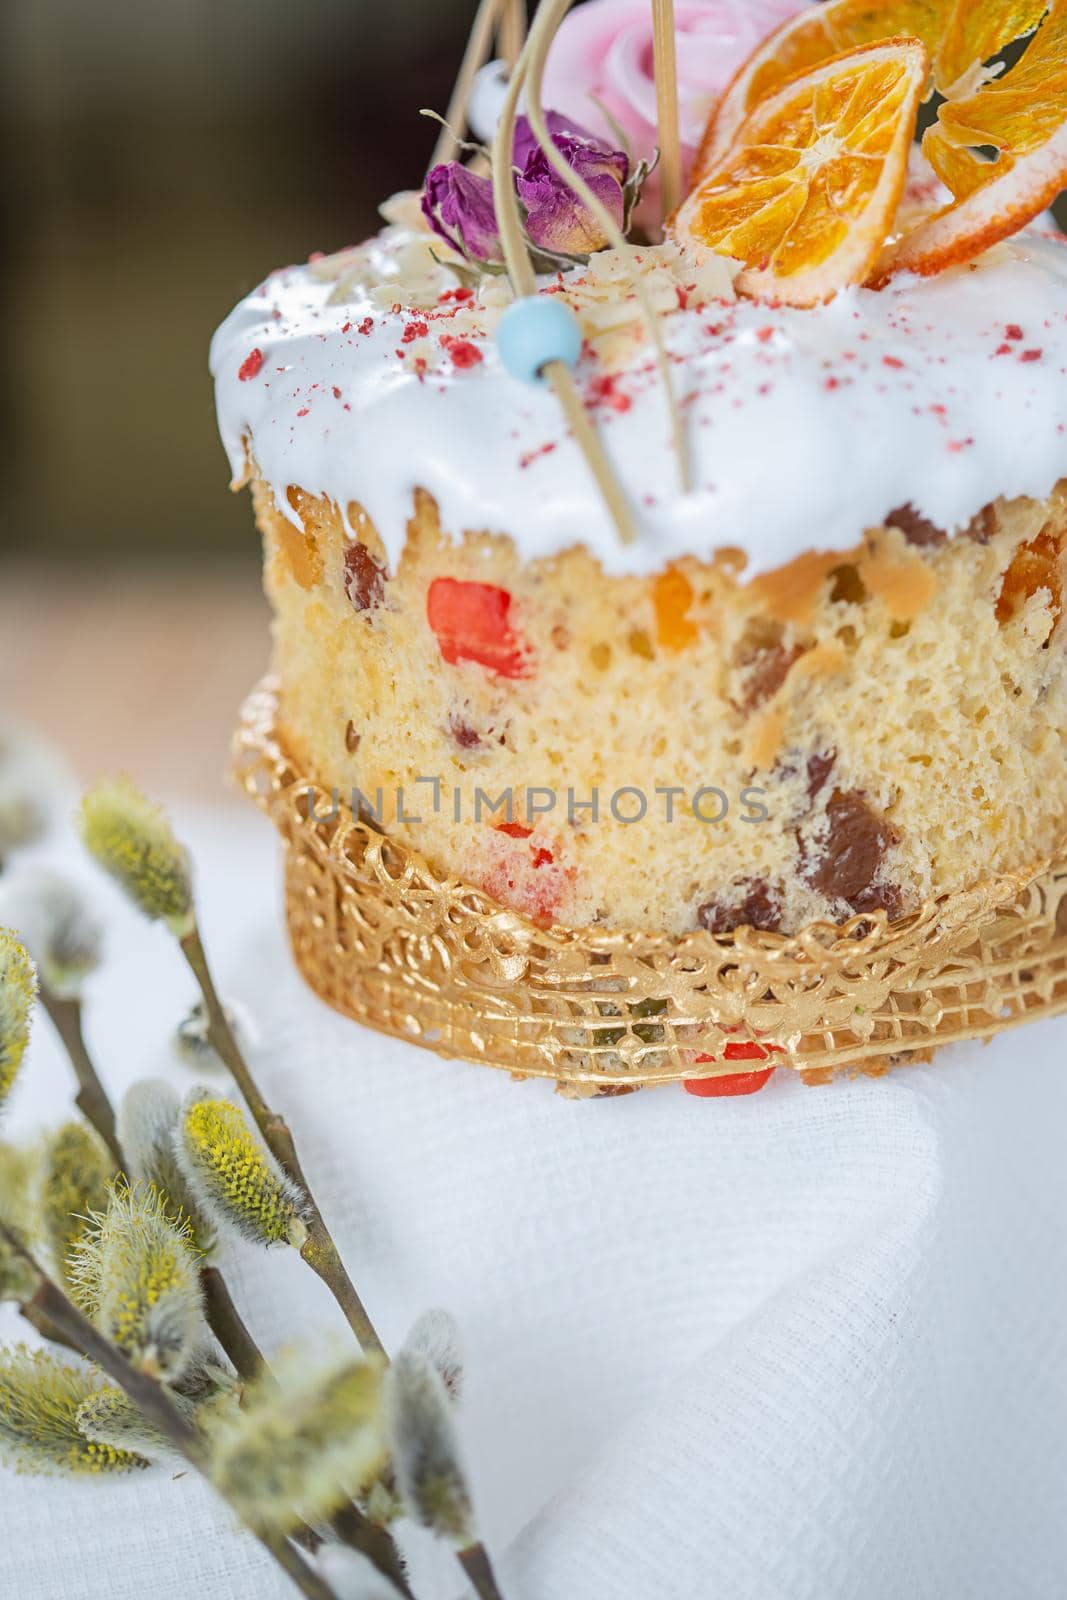 Close-up of an Easter cake. Dried oranges and roses on top of the cake by galinasharapova